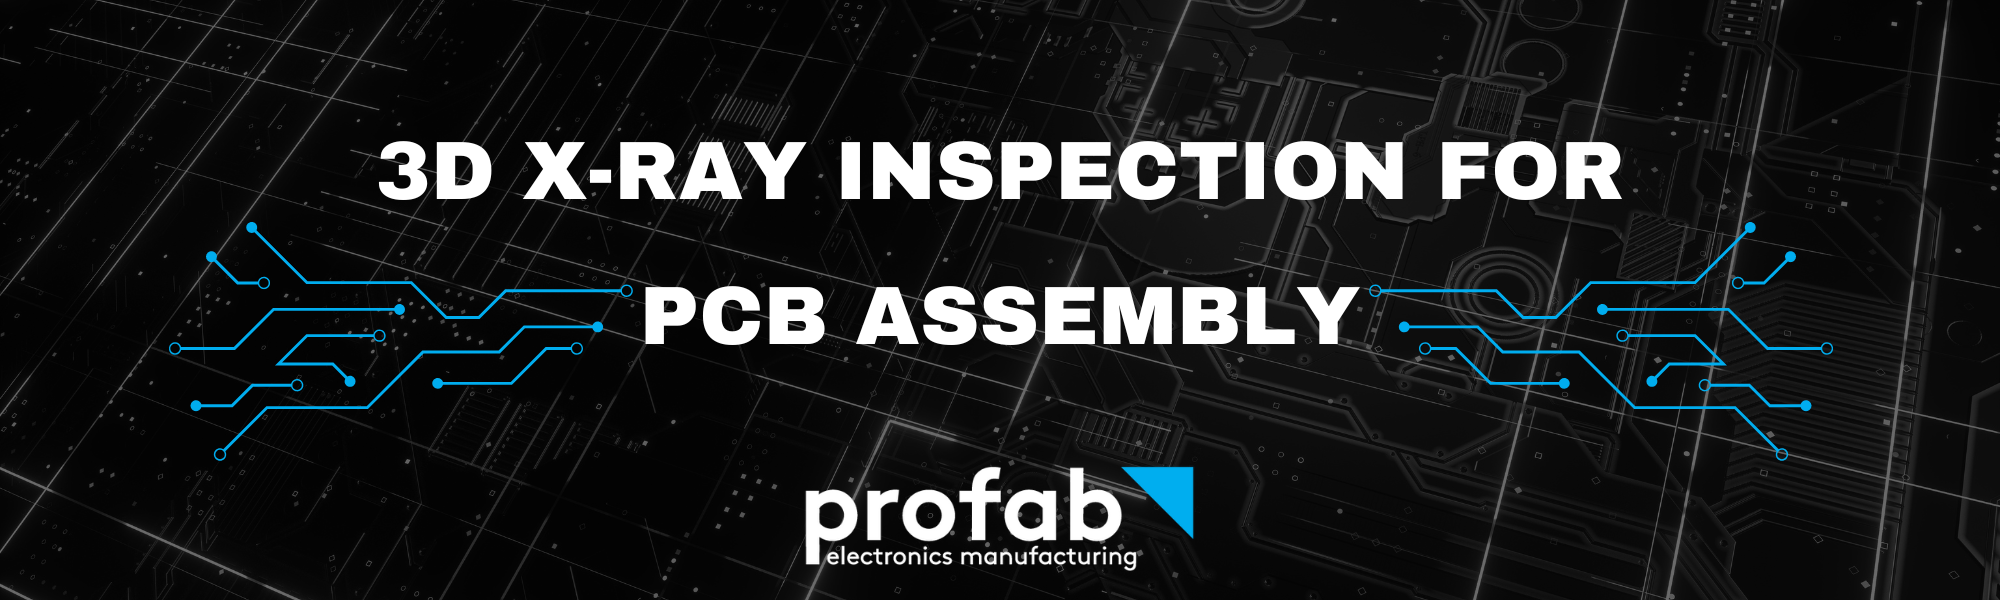 3D X-Ray for PCB Assembly Inspection